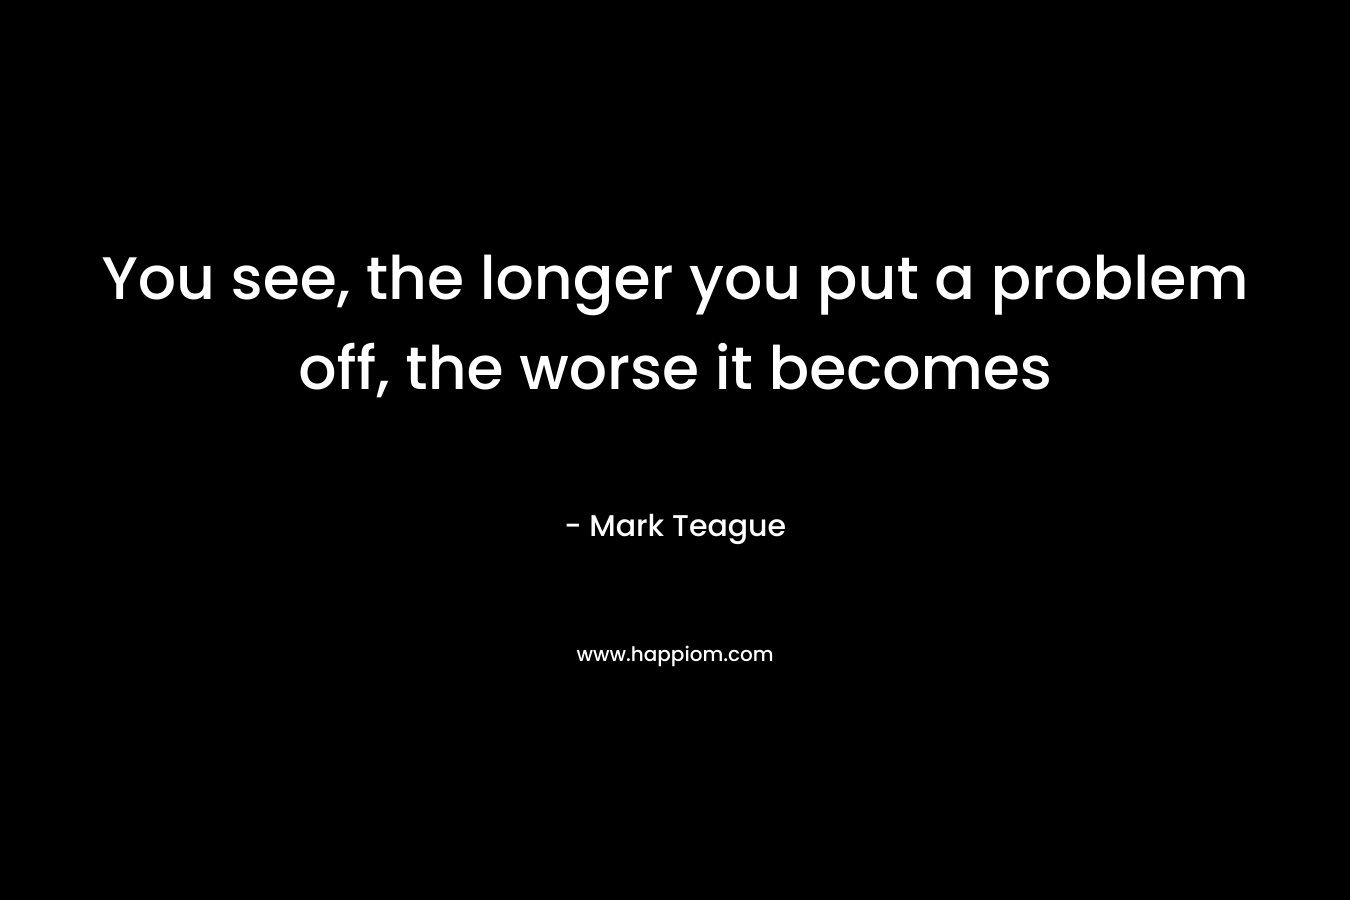 You see, the longer you put a problem off, the worse it becomes – Mark Teague